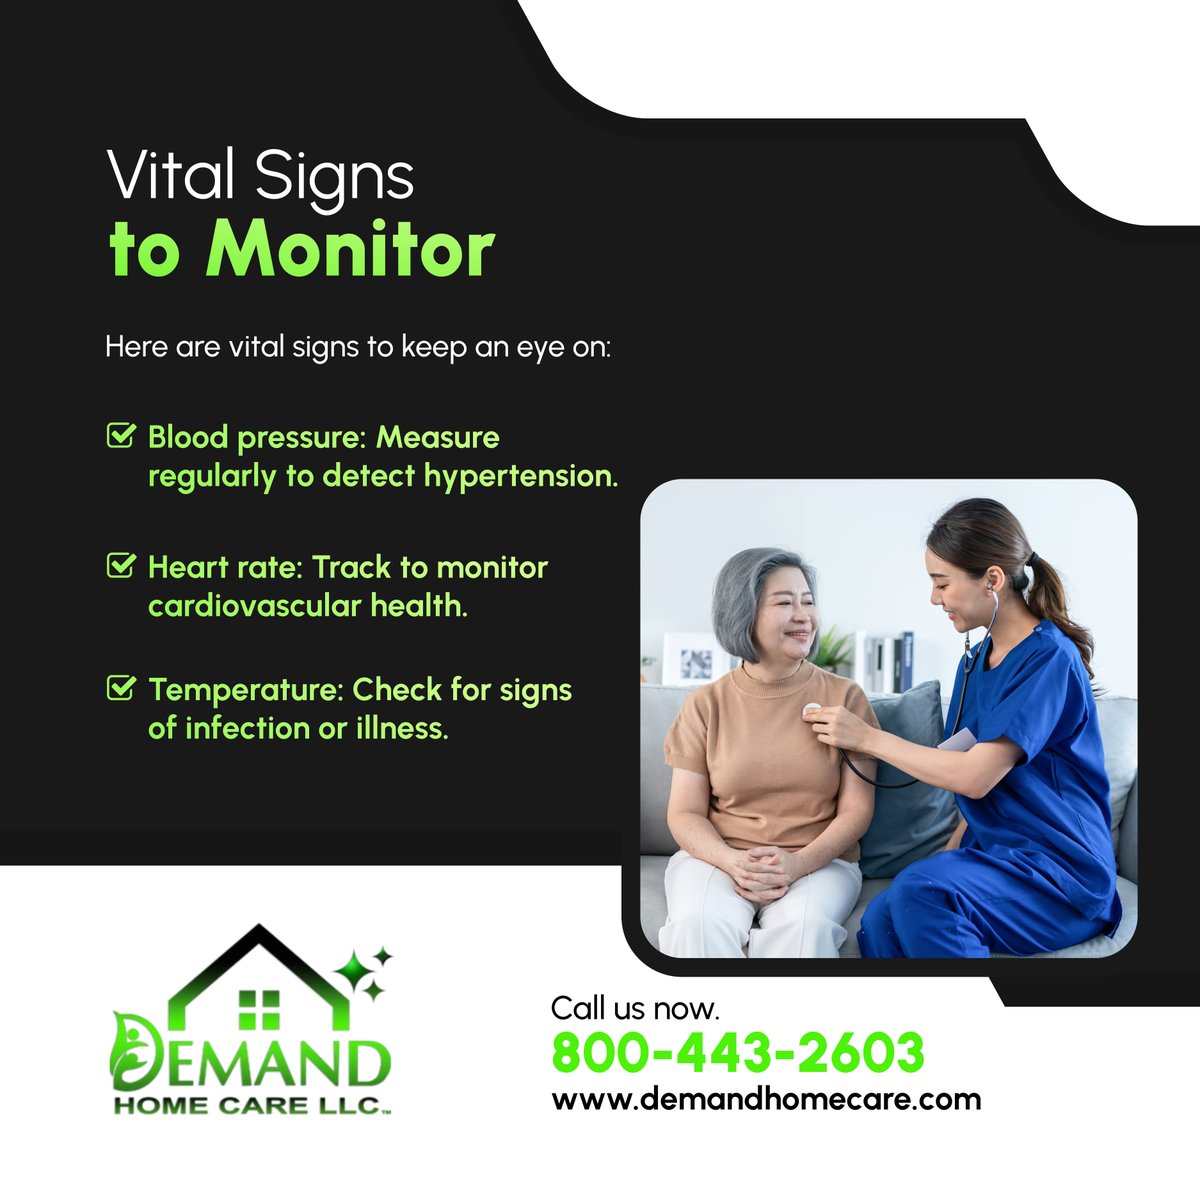 Monitoring vital signs is crucial for assessing health status. Ensure optimal health monitoring with these key vital signs. Need assistance? Give us a ring at (800) 443-2603! 

#DetroitMI #HomeCare #HealthMonitoring #VitalSigns #NursingServices